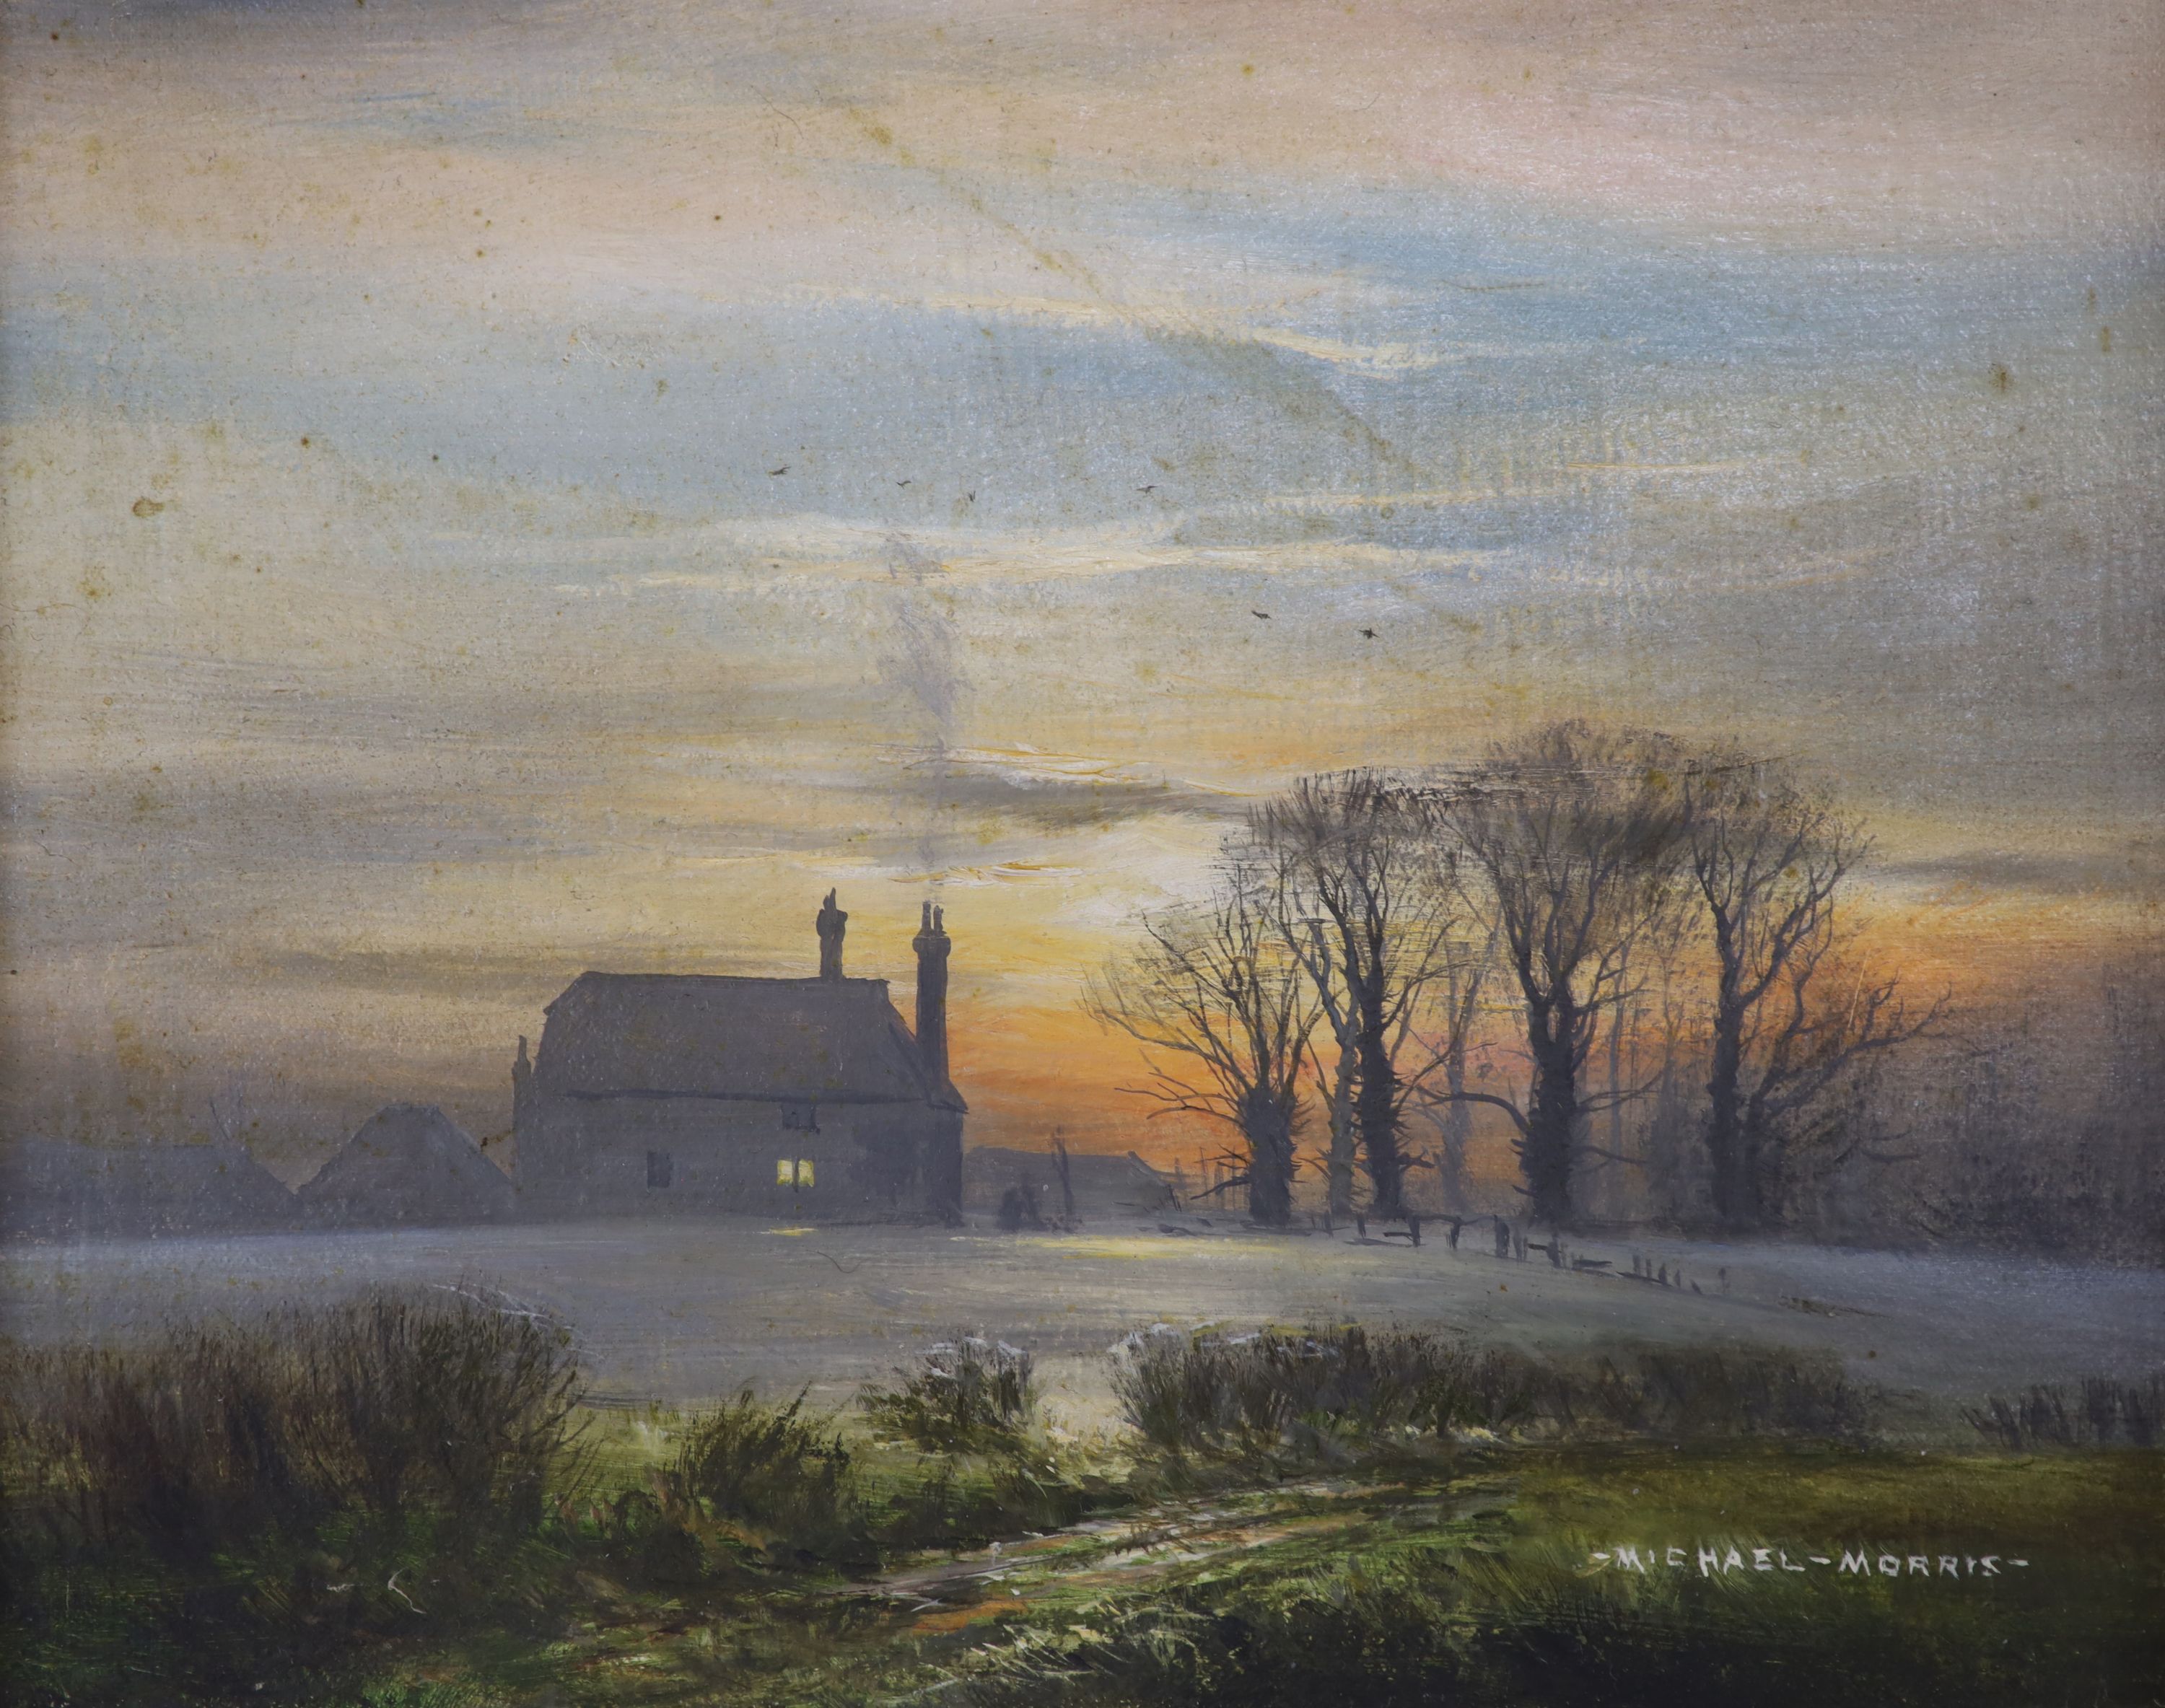 Michael Morris (1942-), oil on canvas, House in winter at sunset, signed, 20 x 25cm